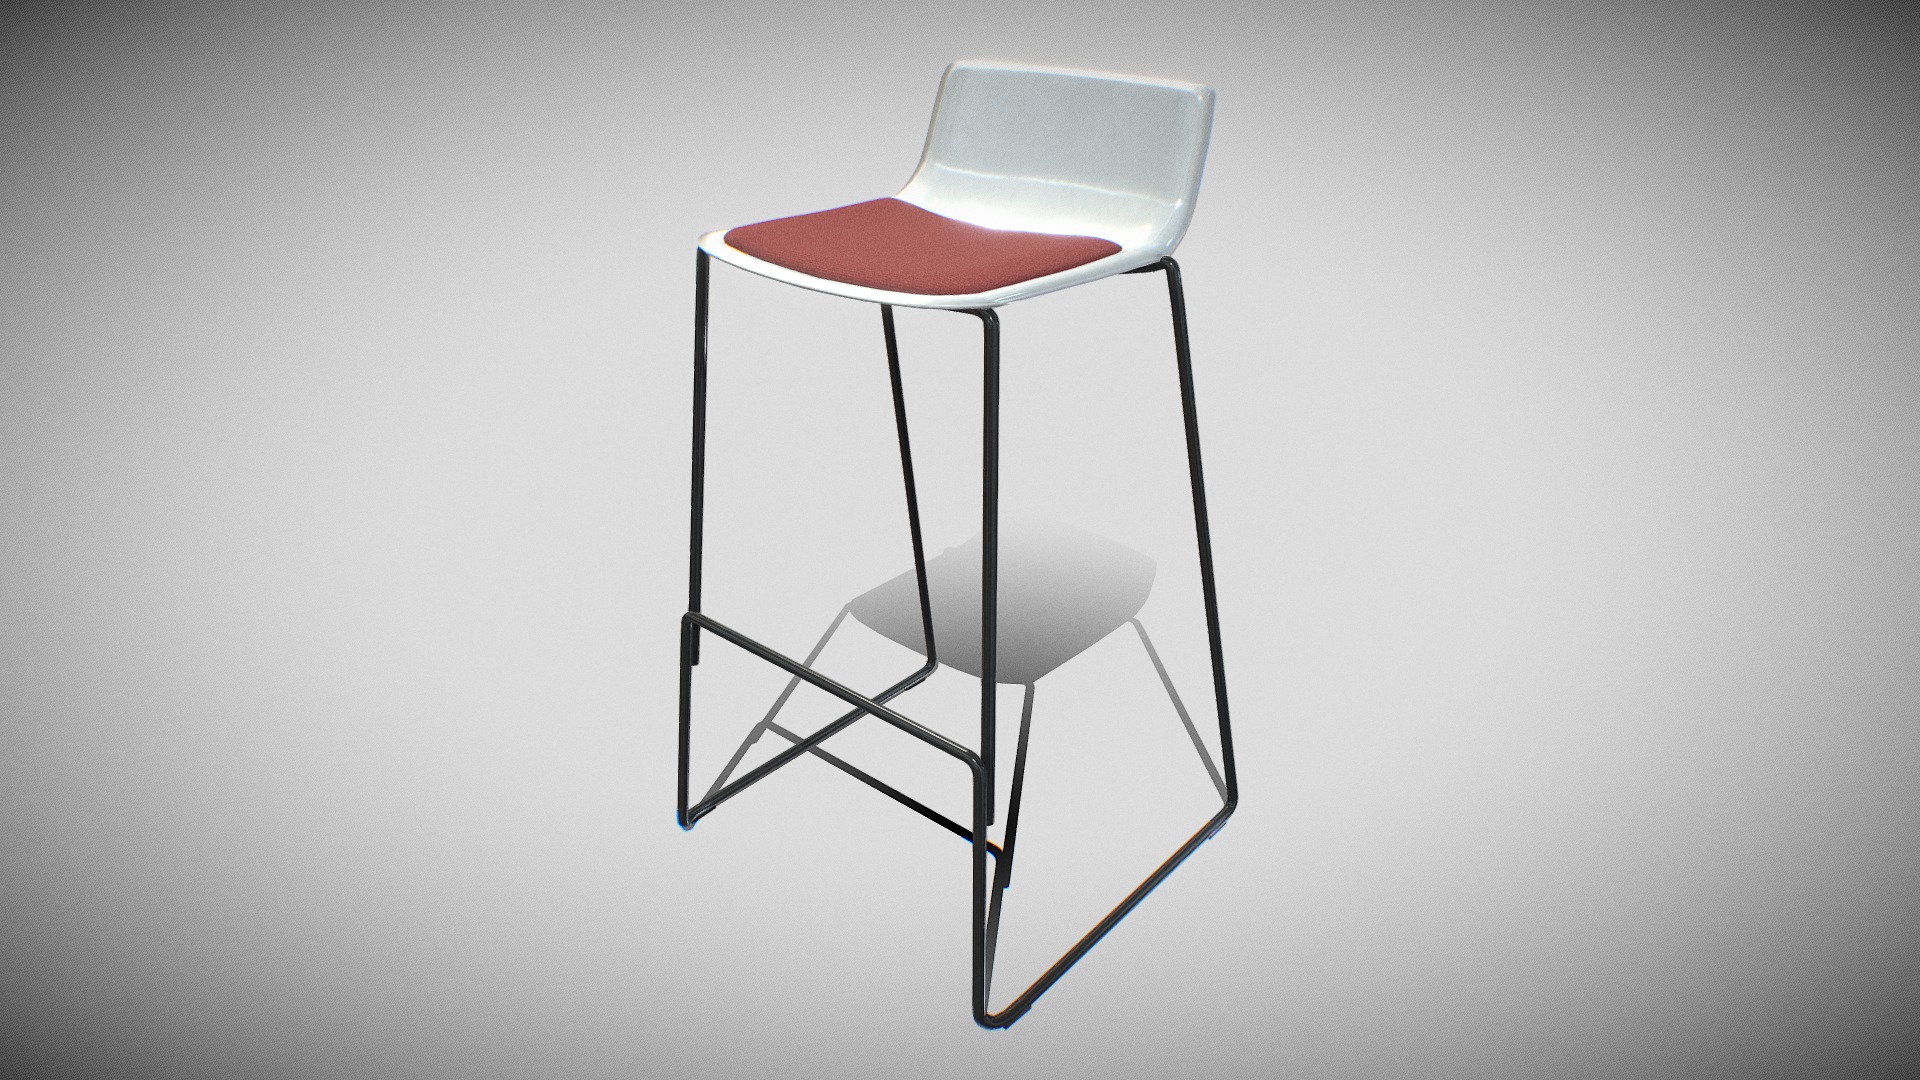 3D model PATo Stool-Model 4310 V-02-Black Painted - This is a 3D model of the PATo Stool-Model 4310 V-02-Black Painted. The 3D model is about a chair with a cushion.